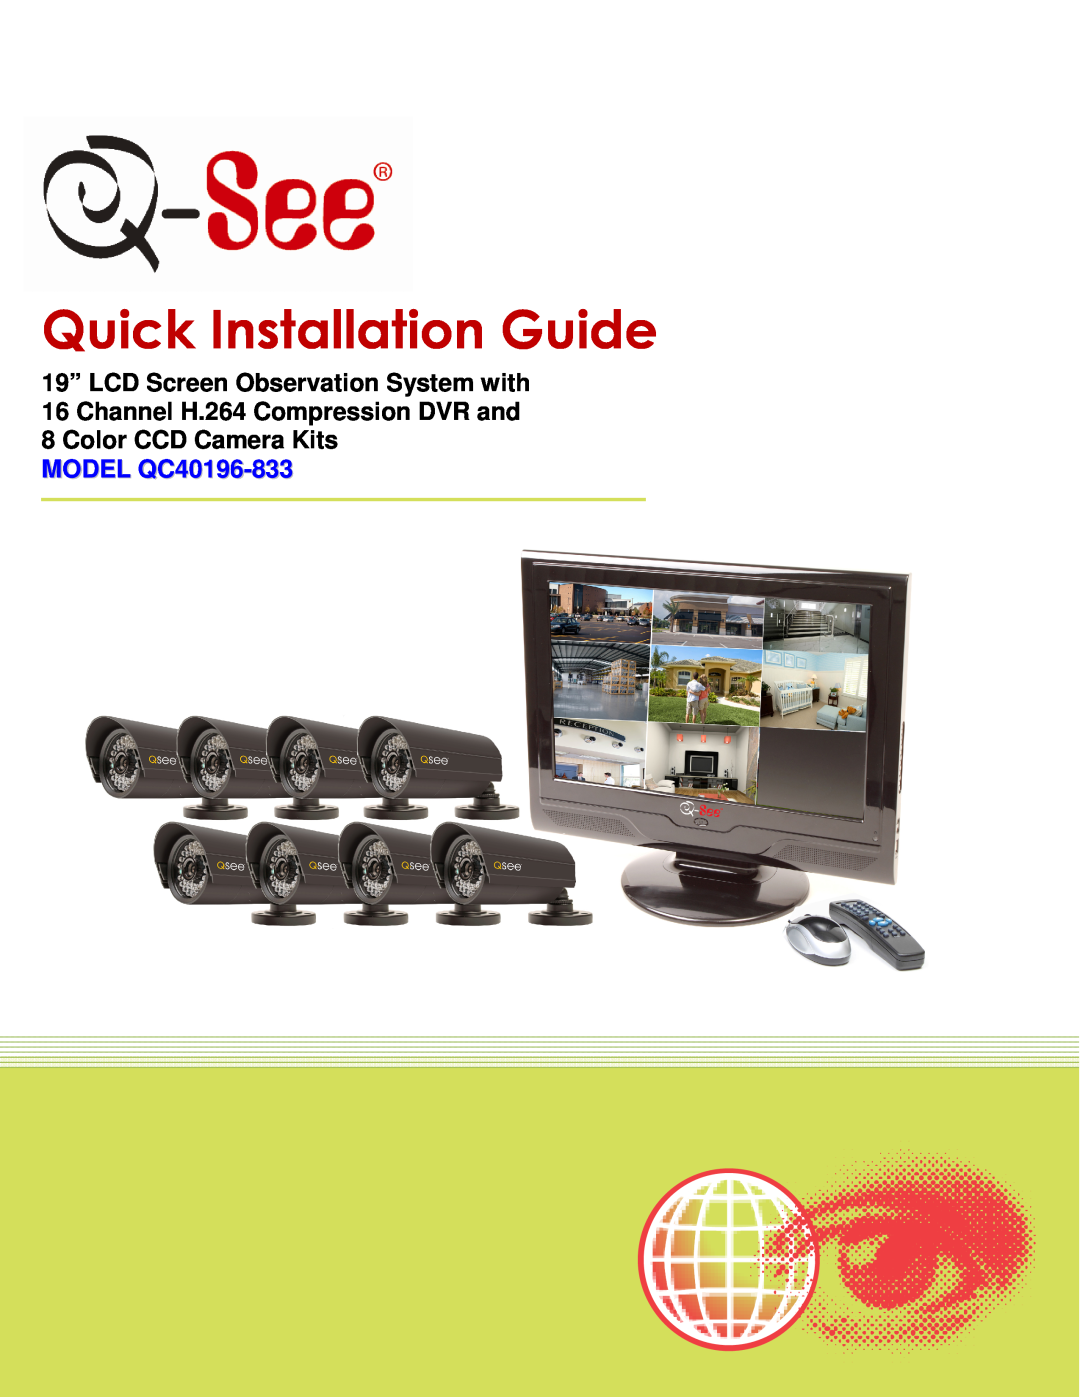 Q-See manual Quick Installation Guide, MODEL QC40196-833 